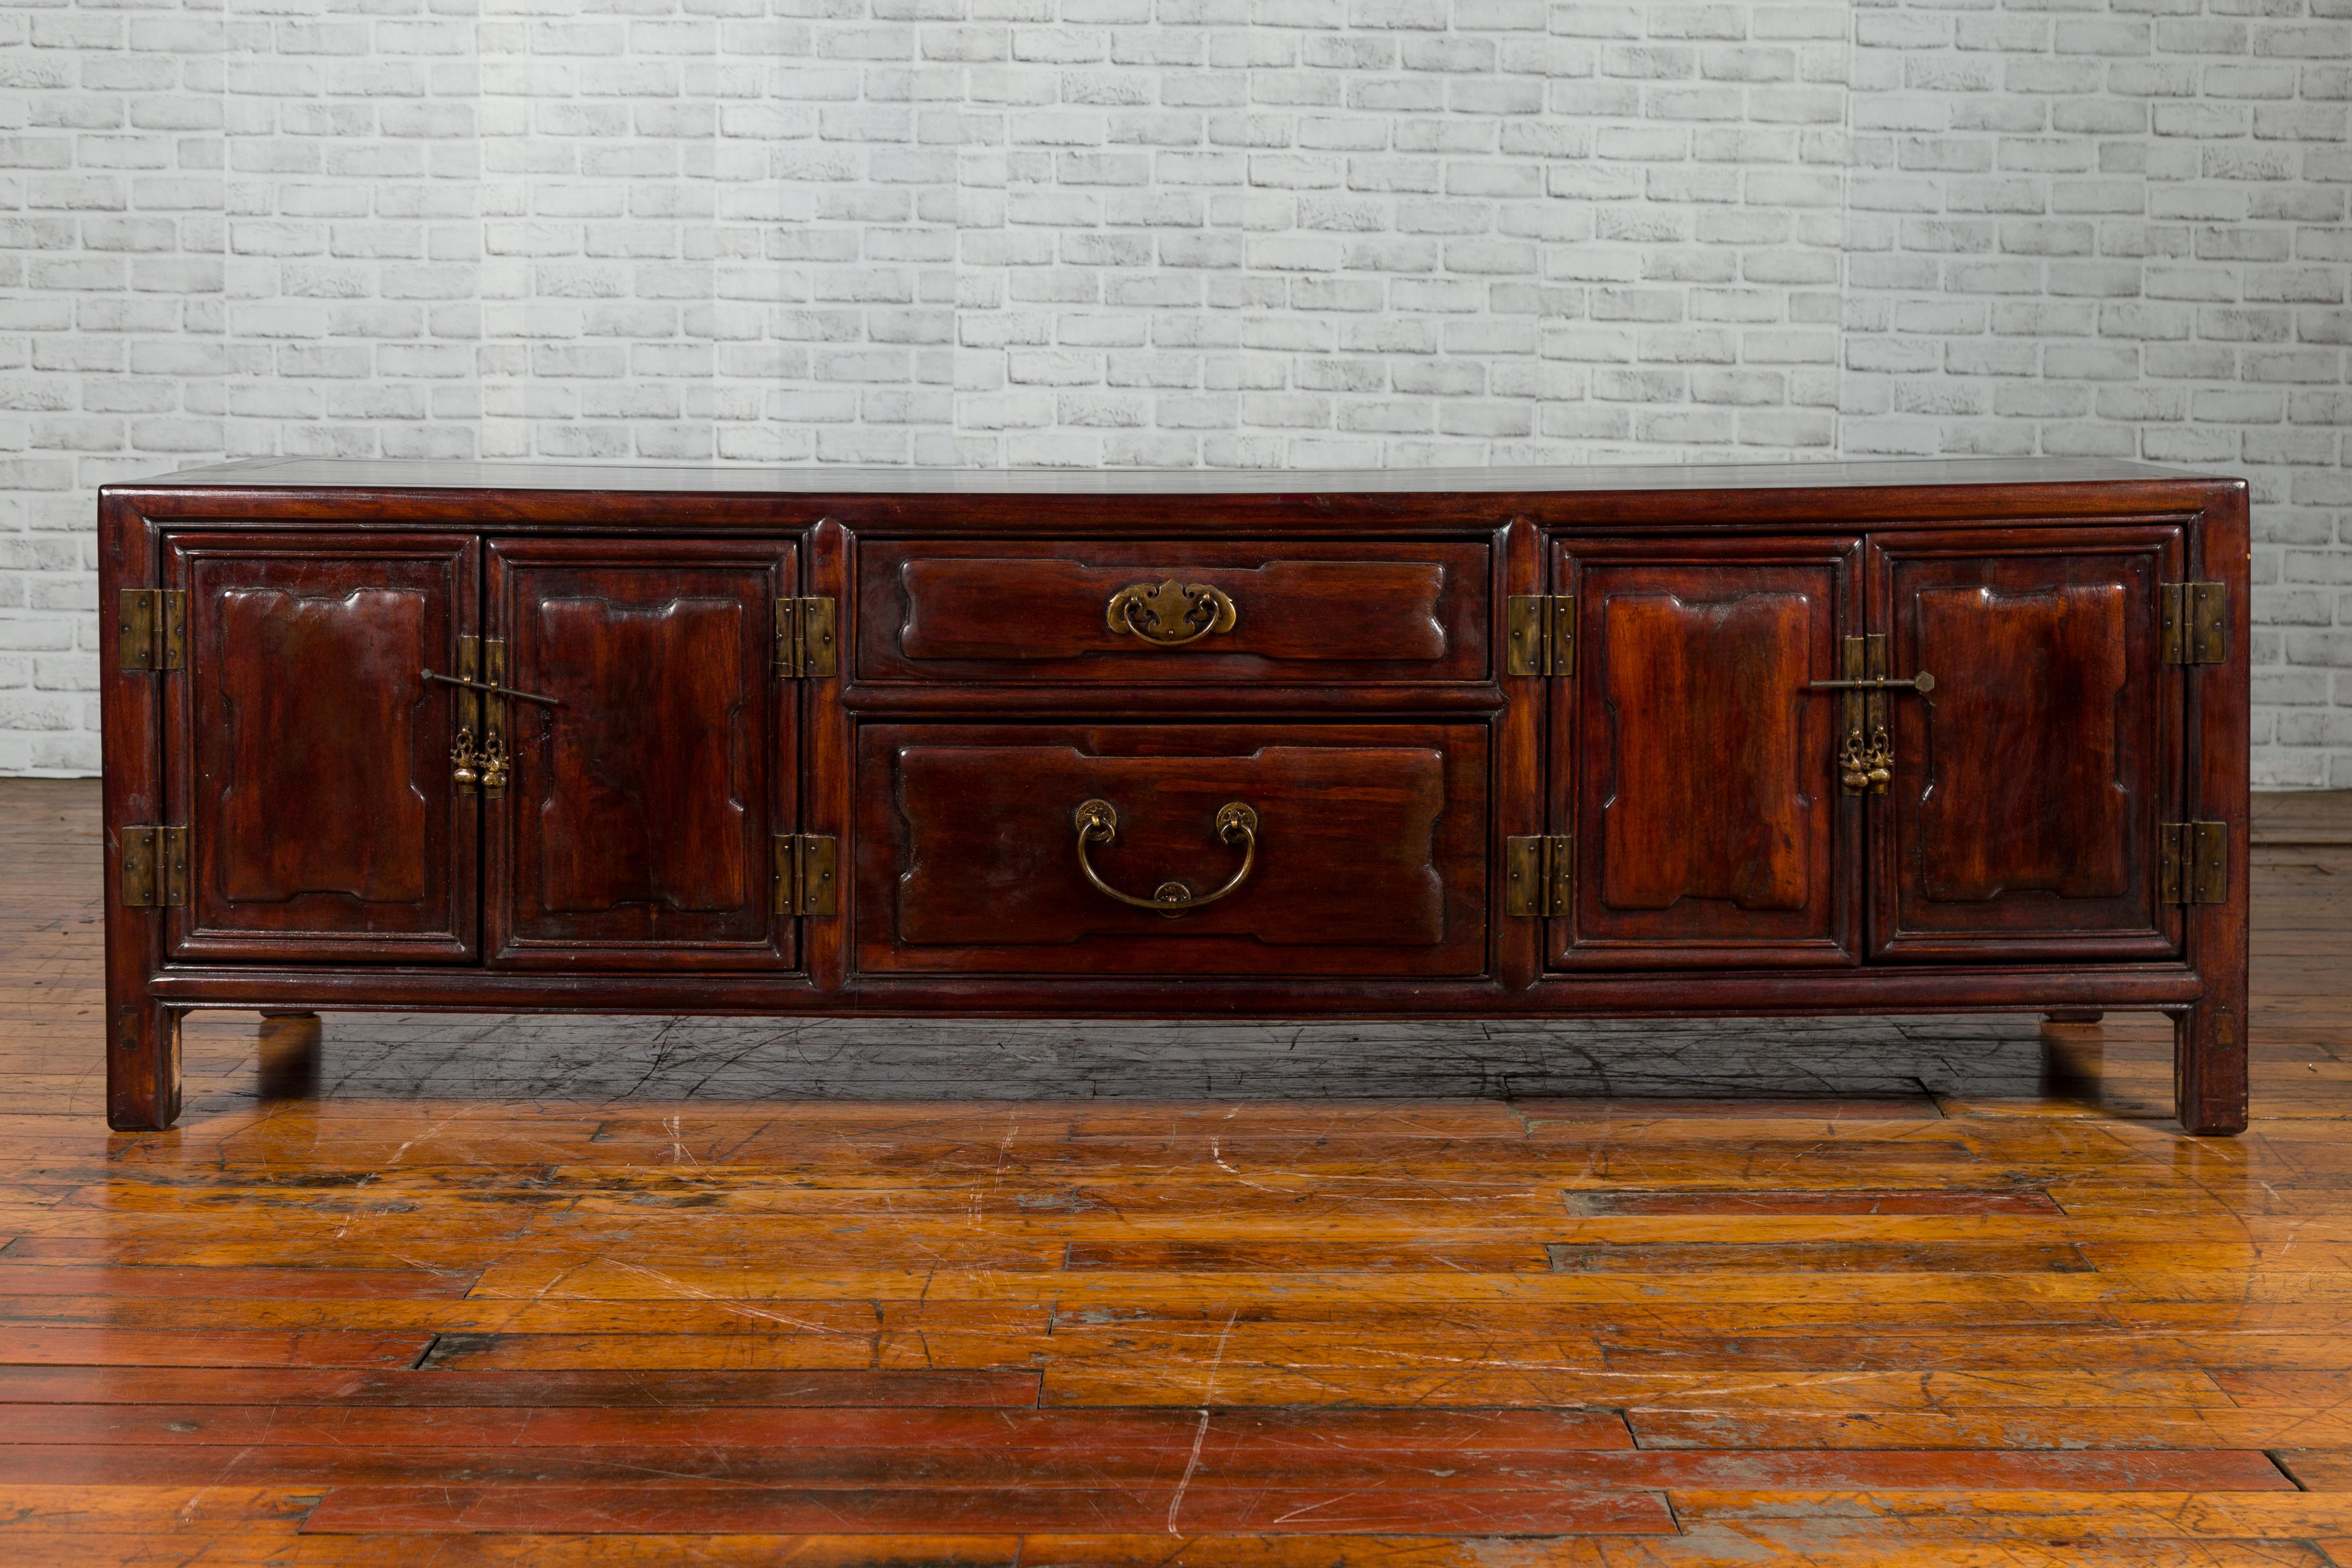 A Chinese Qing Dynasty period low Kang cabinet from the 19th century, with two pairs of double doors and central drawers. Created in China during the 19th century, this Kang cabinet features a long rectangular top with central board, sitting above a